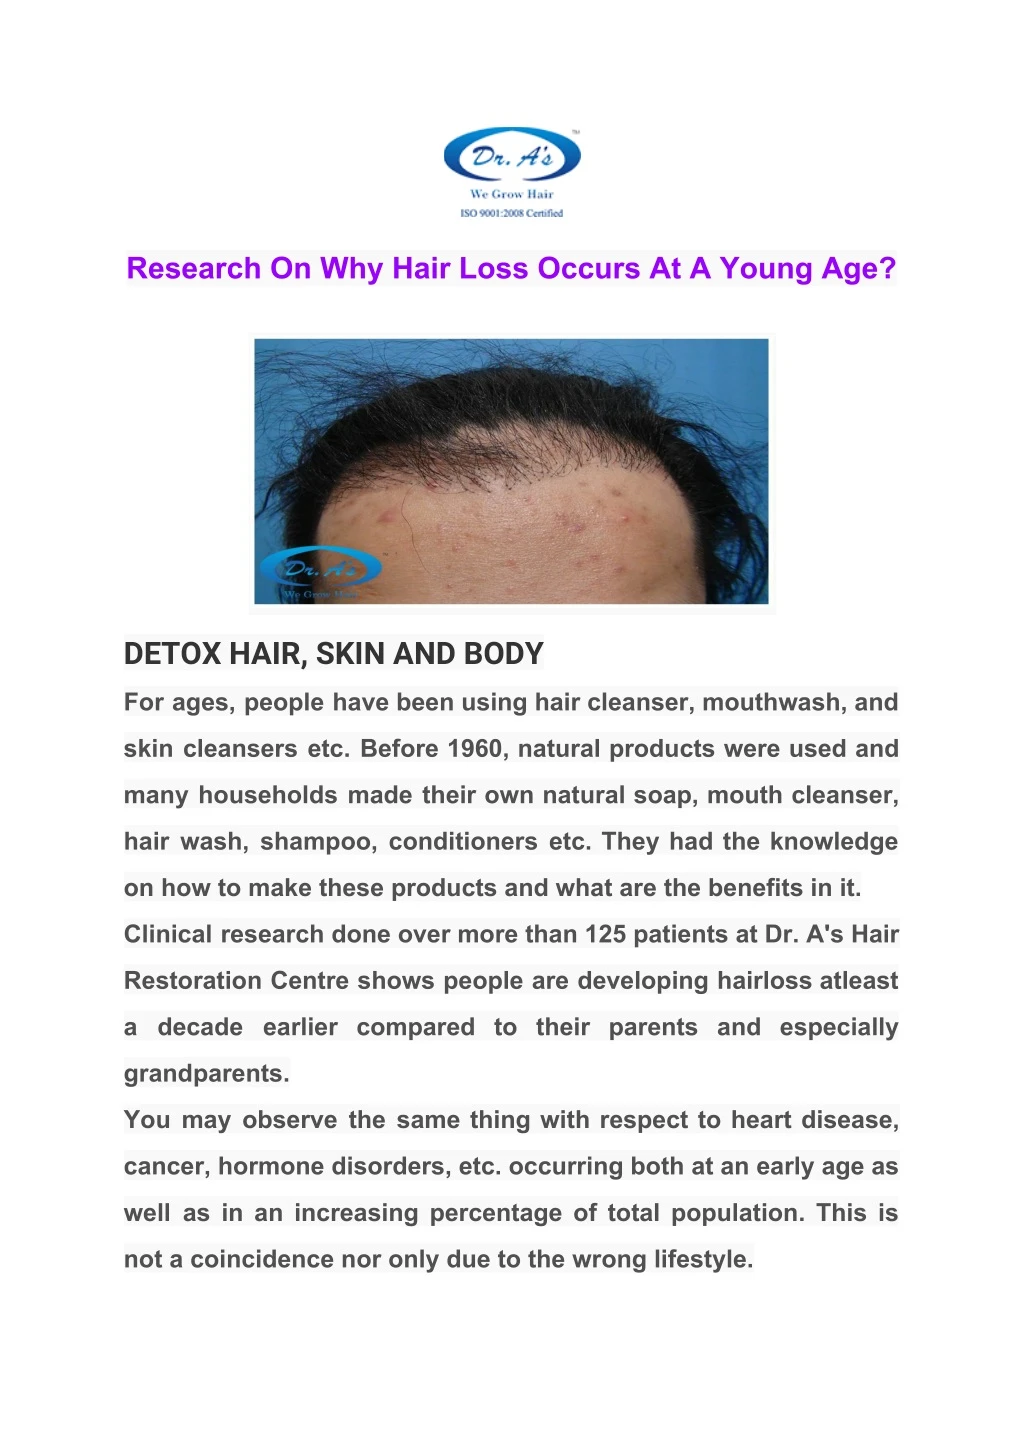 research on why hair loss occurs at a young age